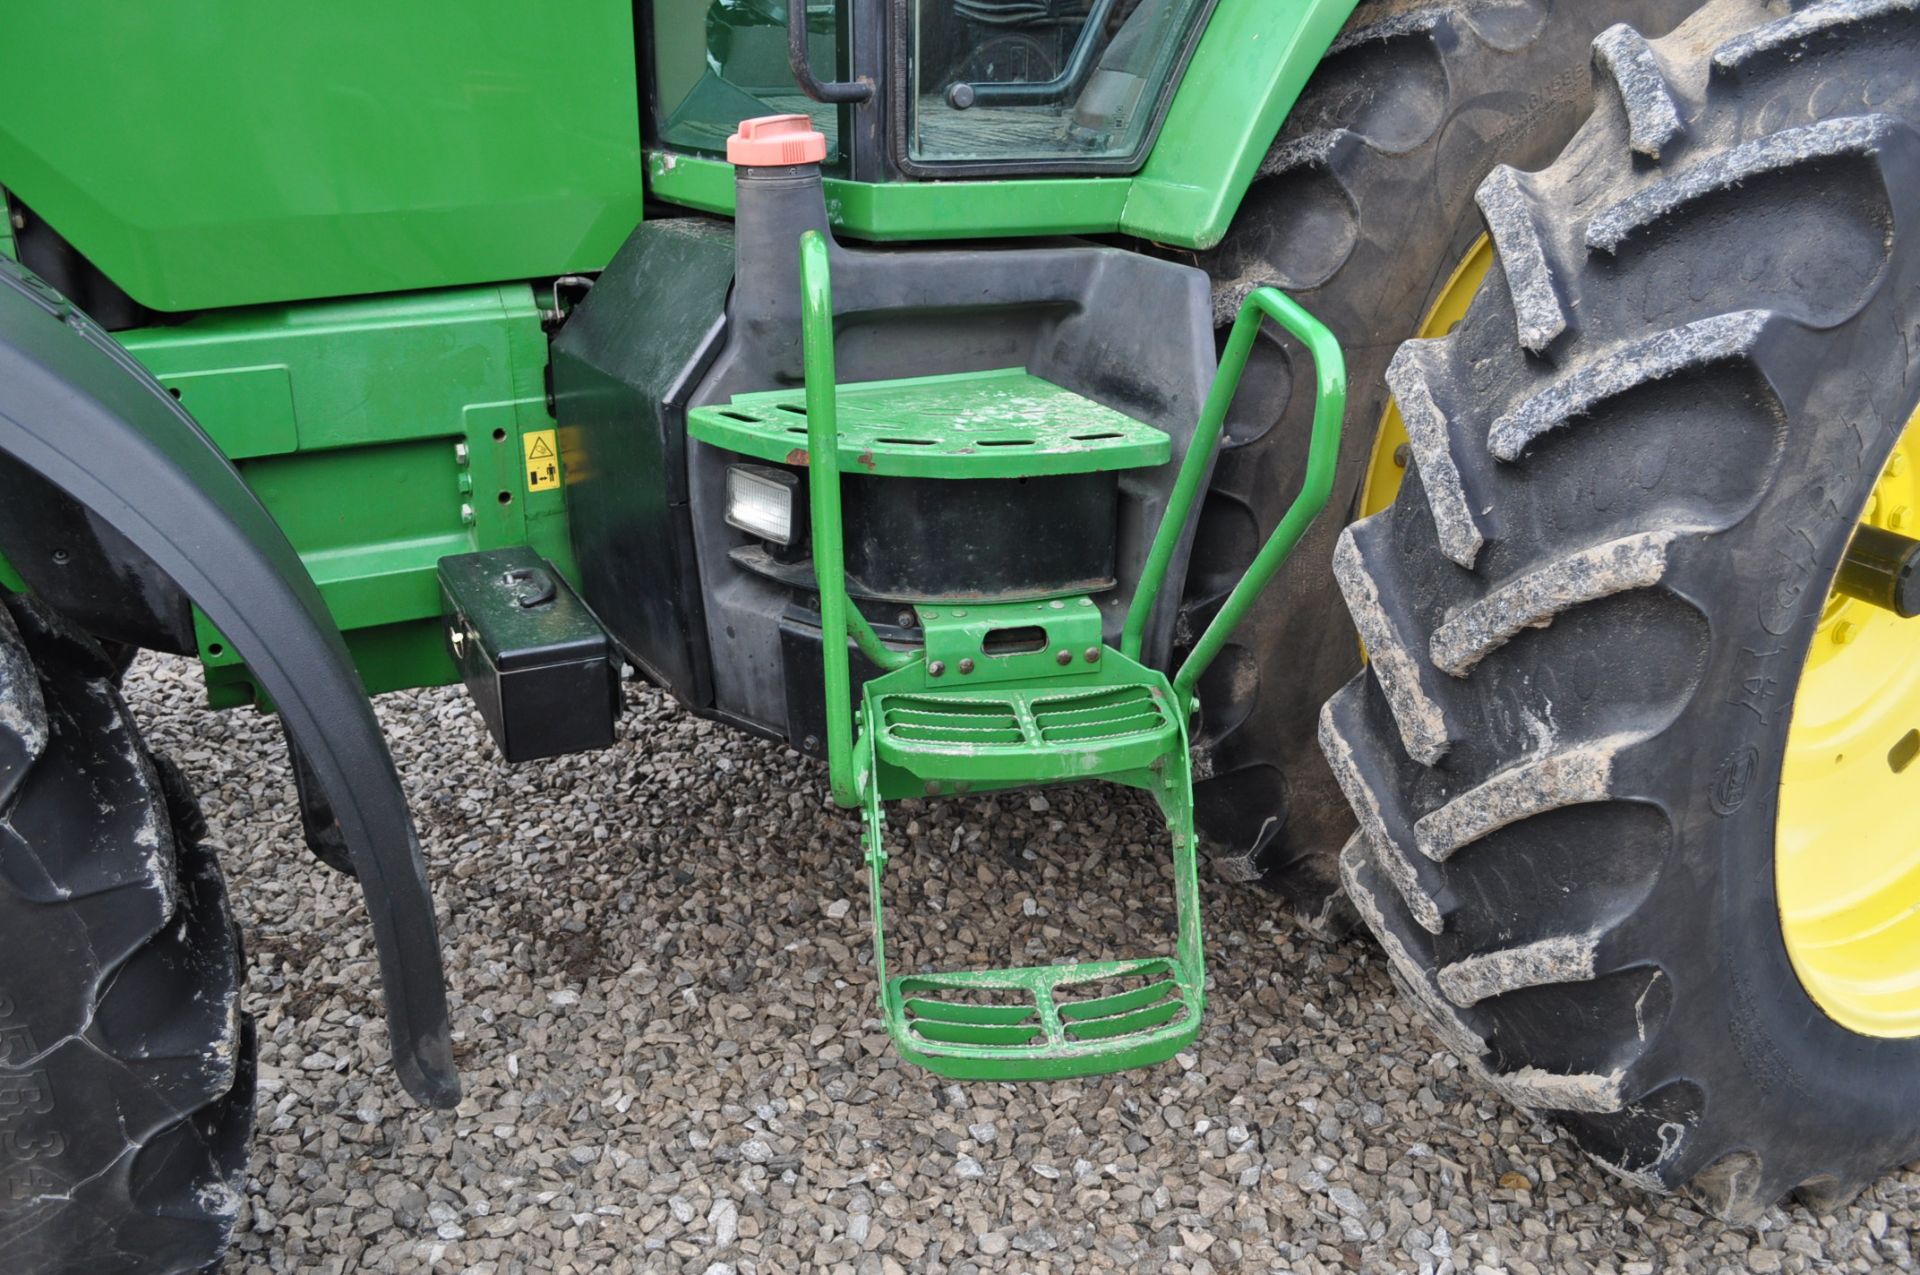 John Deere 8300 tractor, MFWD, 480/80 R 46 duals, 380/85 R 34 front, fenders, front wts, 4 hyd - Image 13 of 21